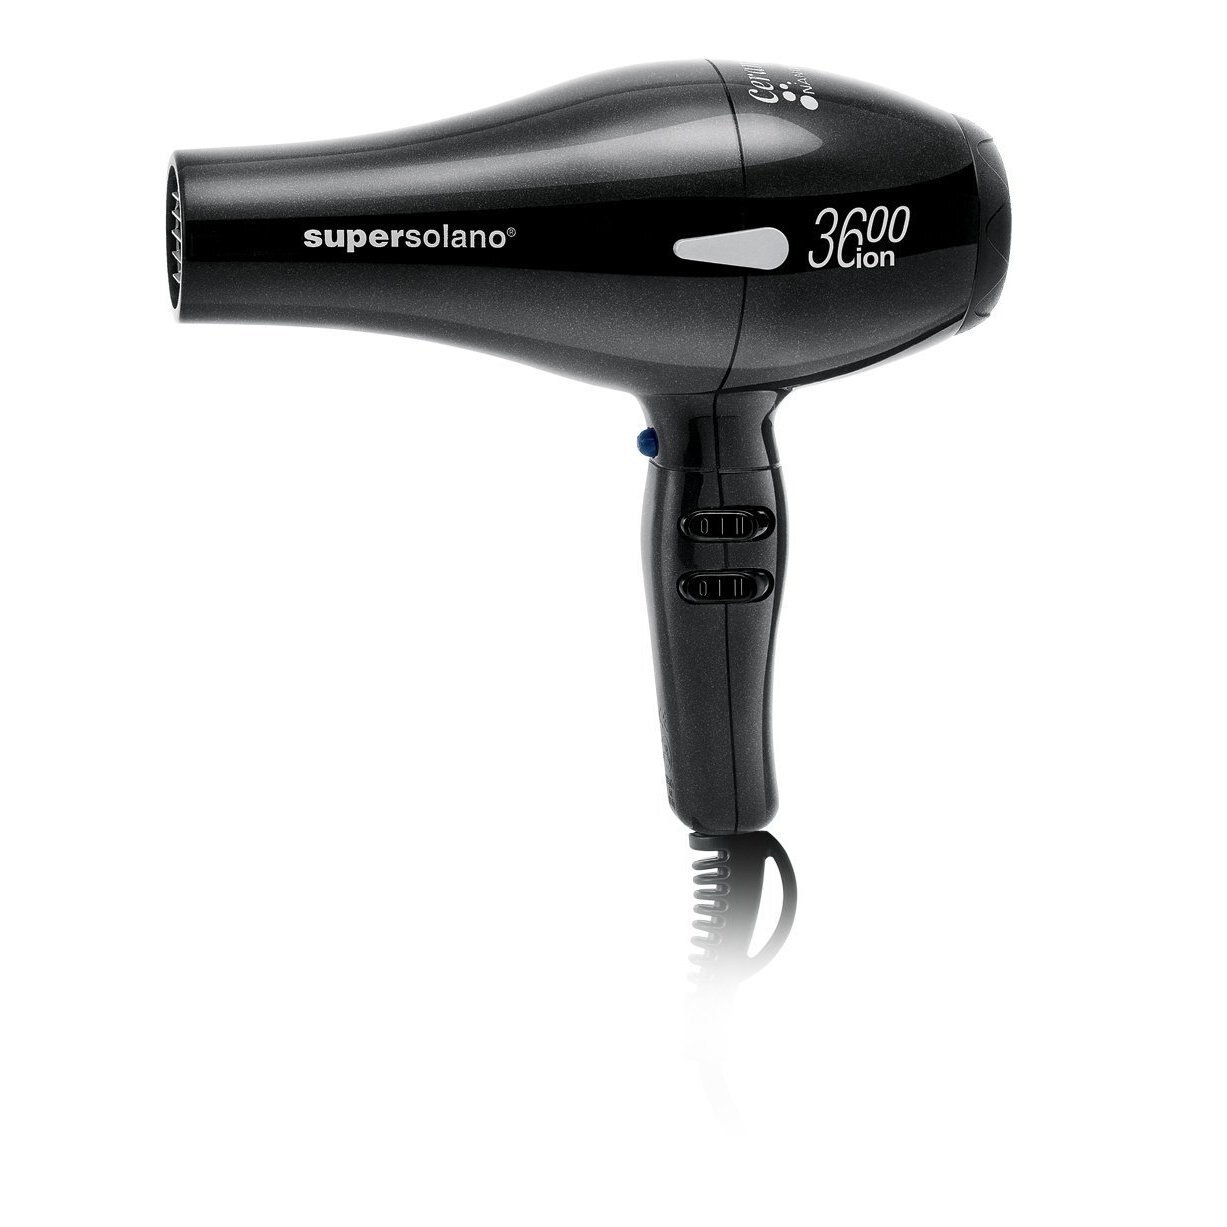 Solano Supersolano 3600 Ion Professional Hair Dryer Free